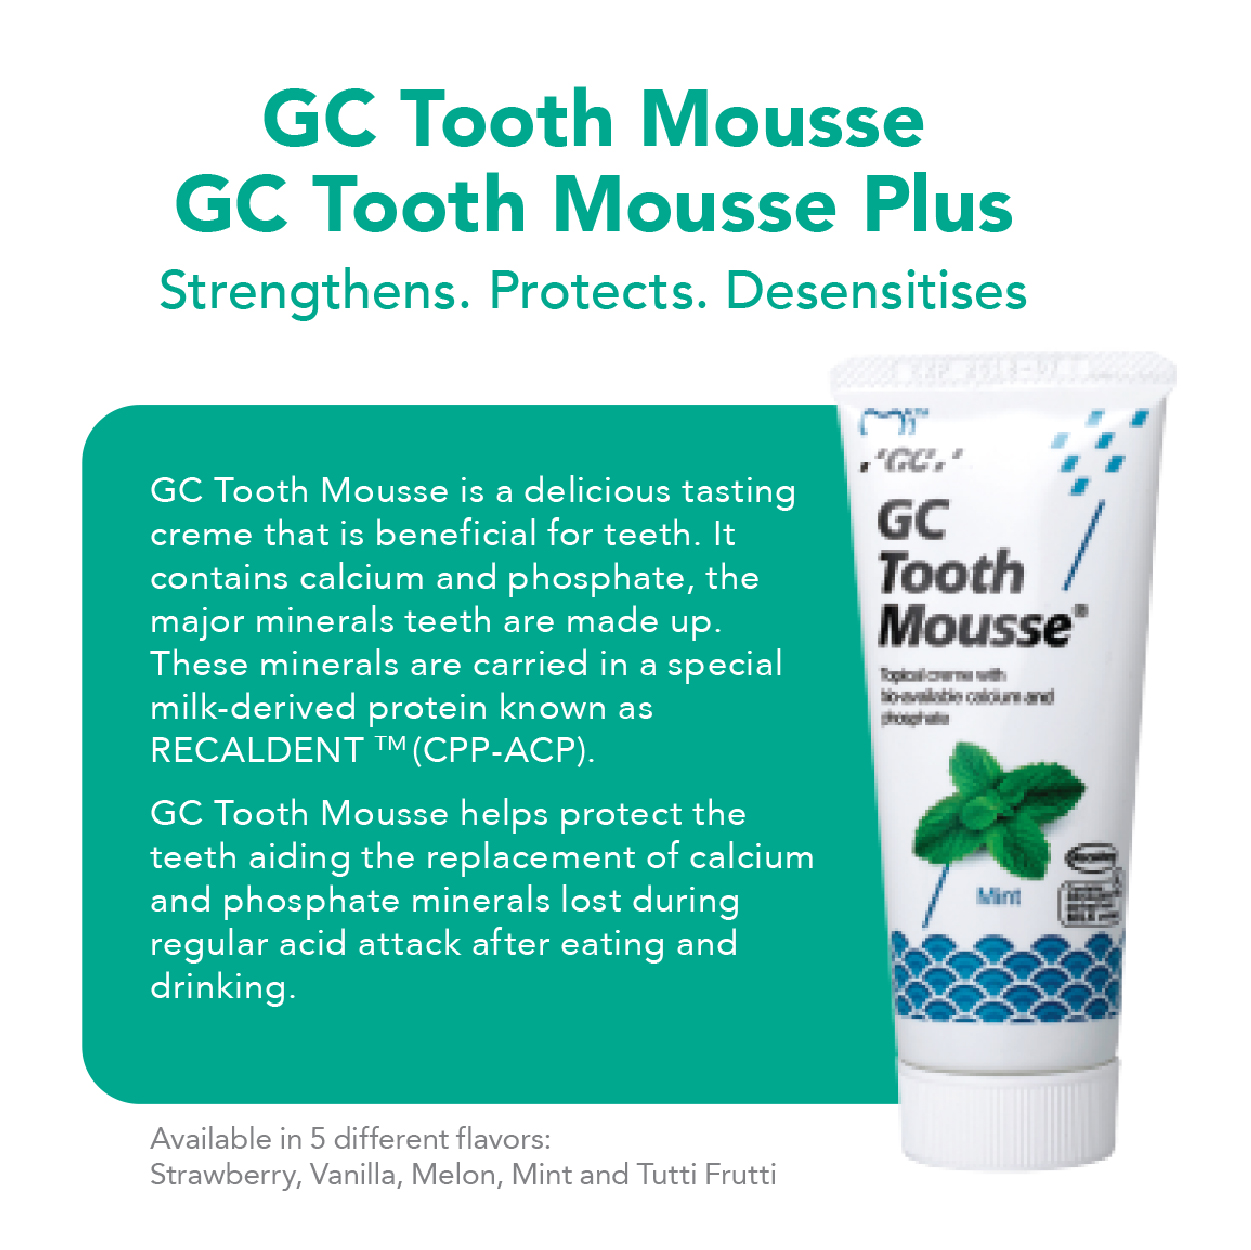 GC TOOTH MOUSSE SUGAR FREE TOPICAL CREME MINT 40G